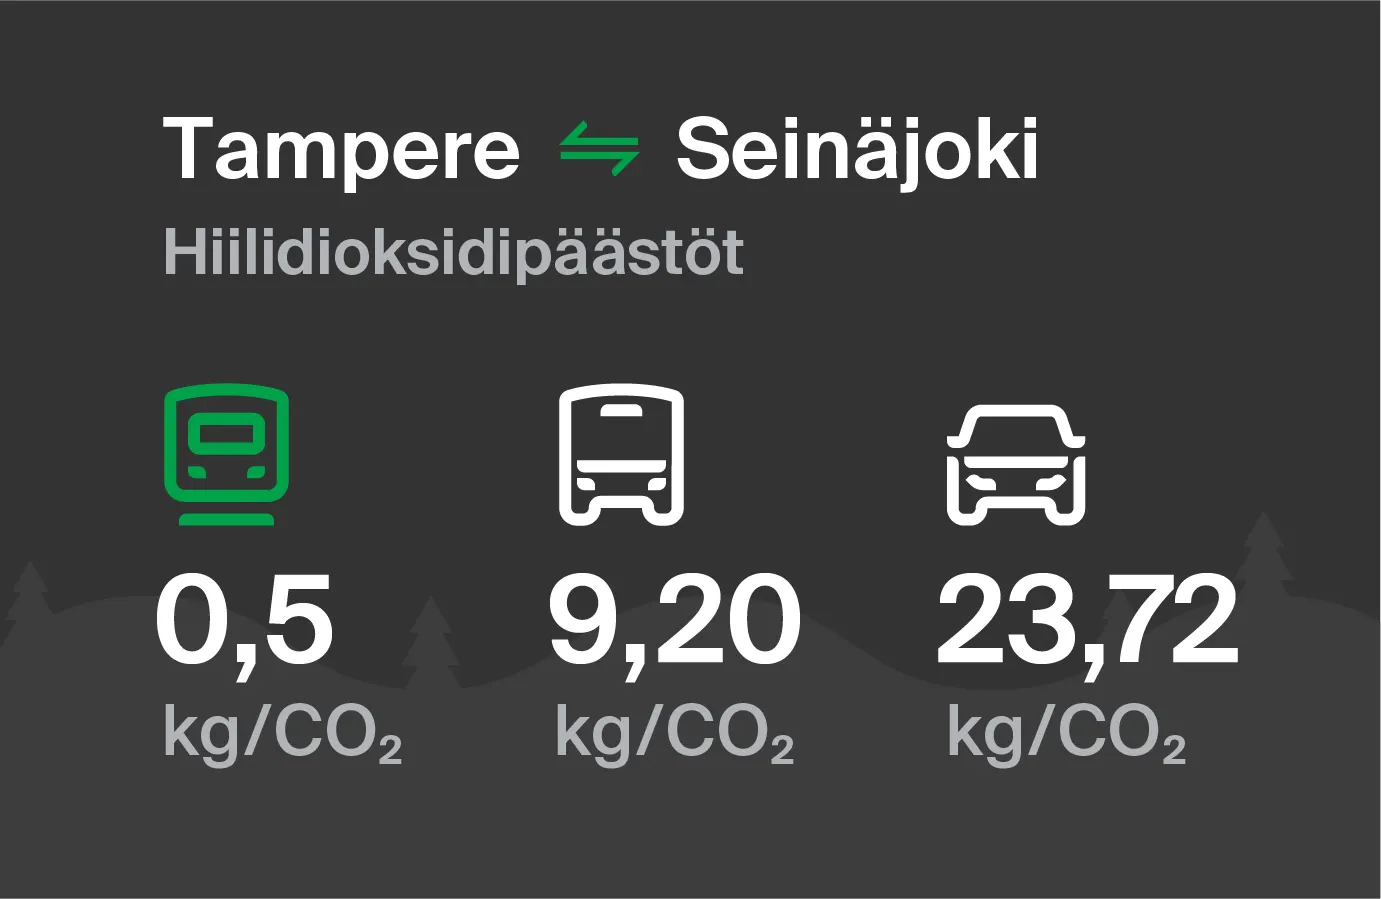 Carbon dioxide emissions from Tampere to Seinäjoki by different modes of transport: by train 0.5 kg/CO2, by bus 9.20 kg/CO2 and by car 23.72 kg/CO2.